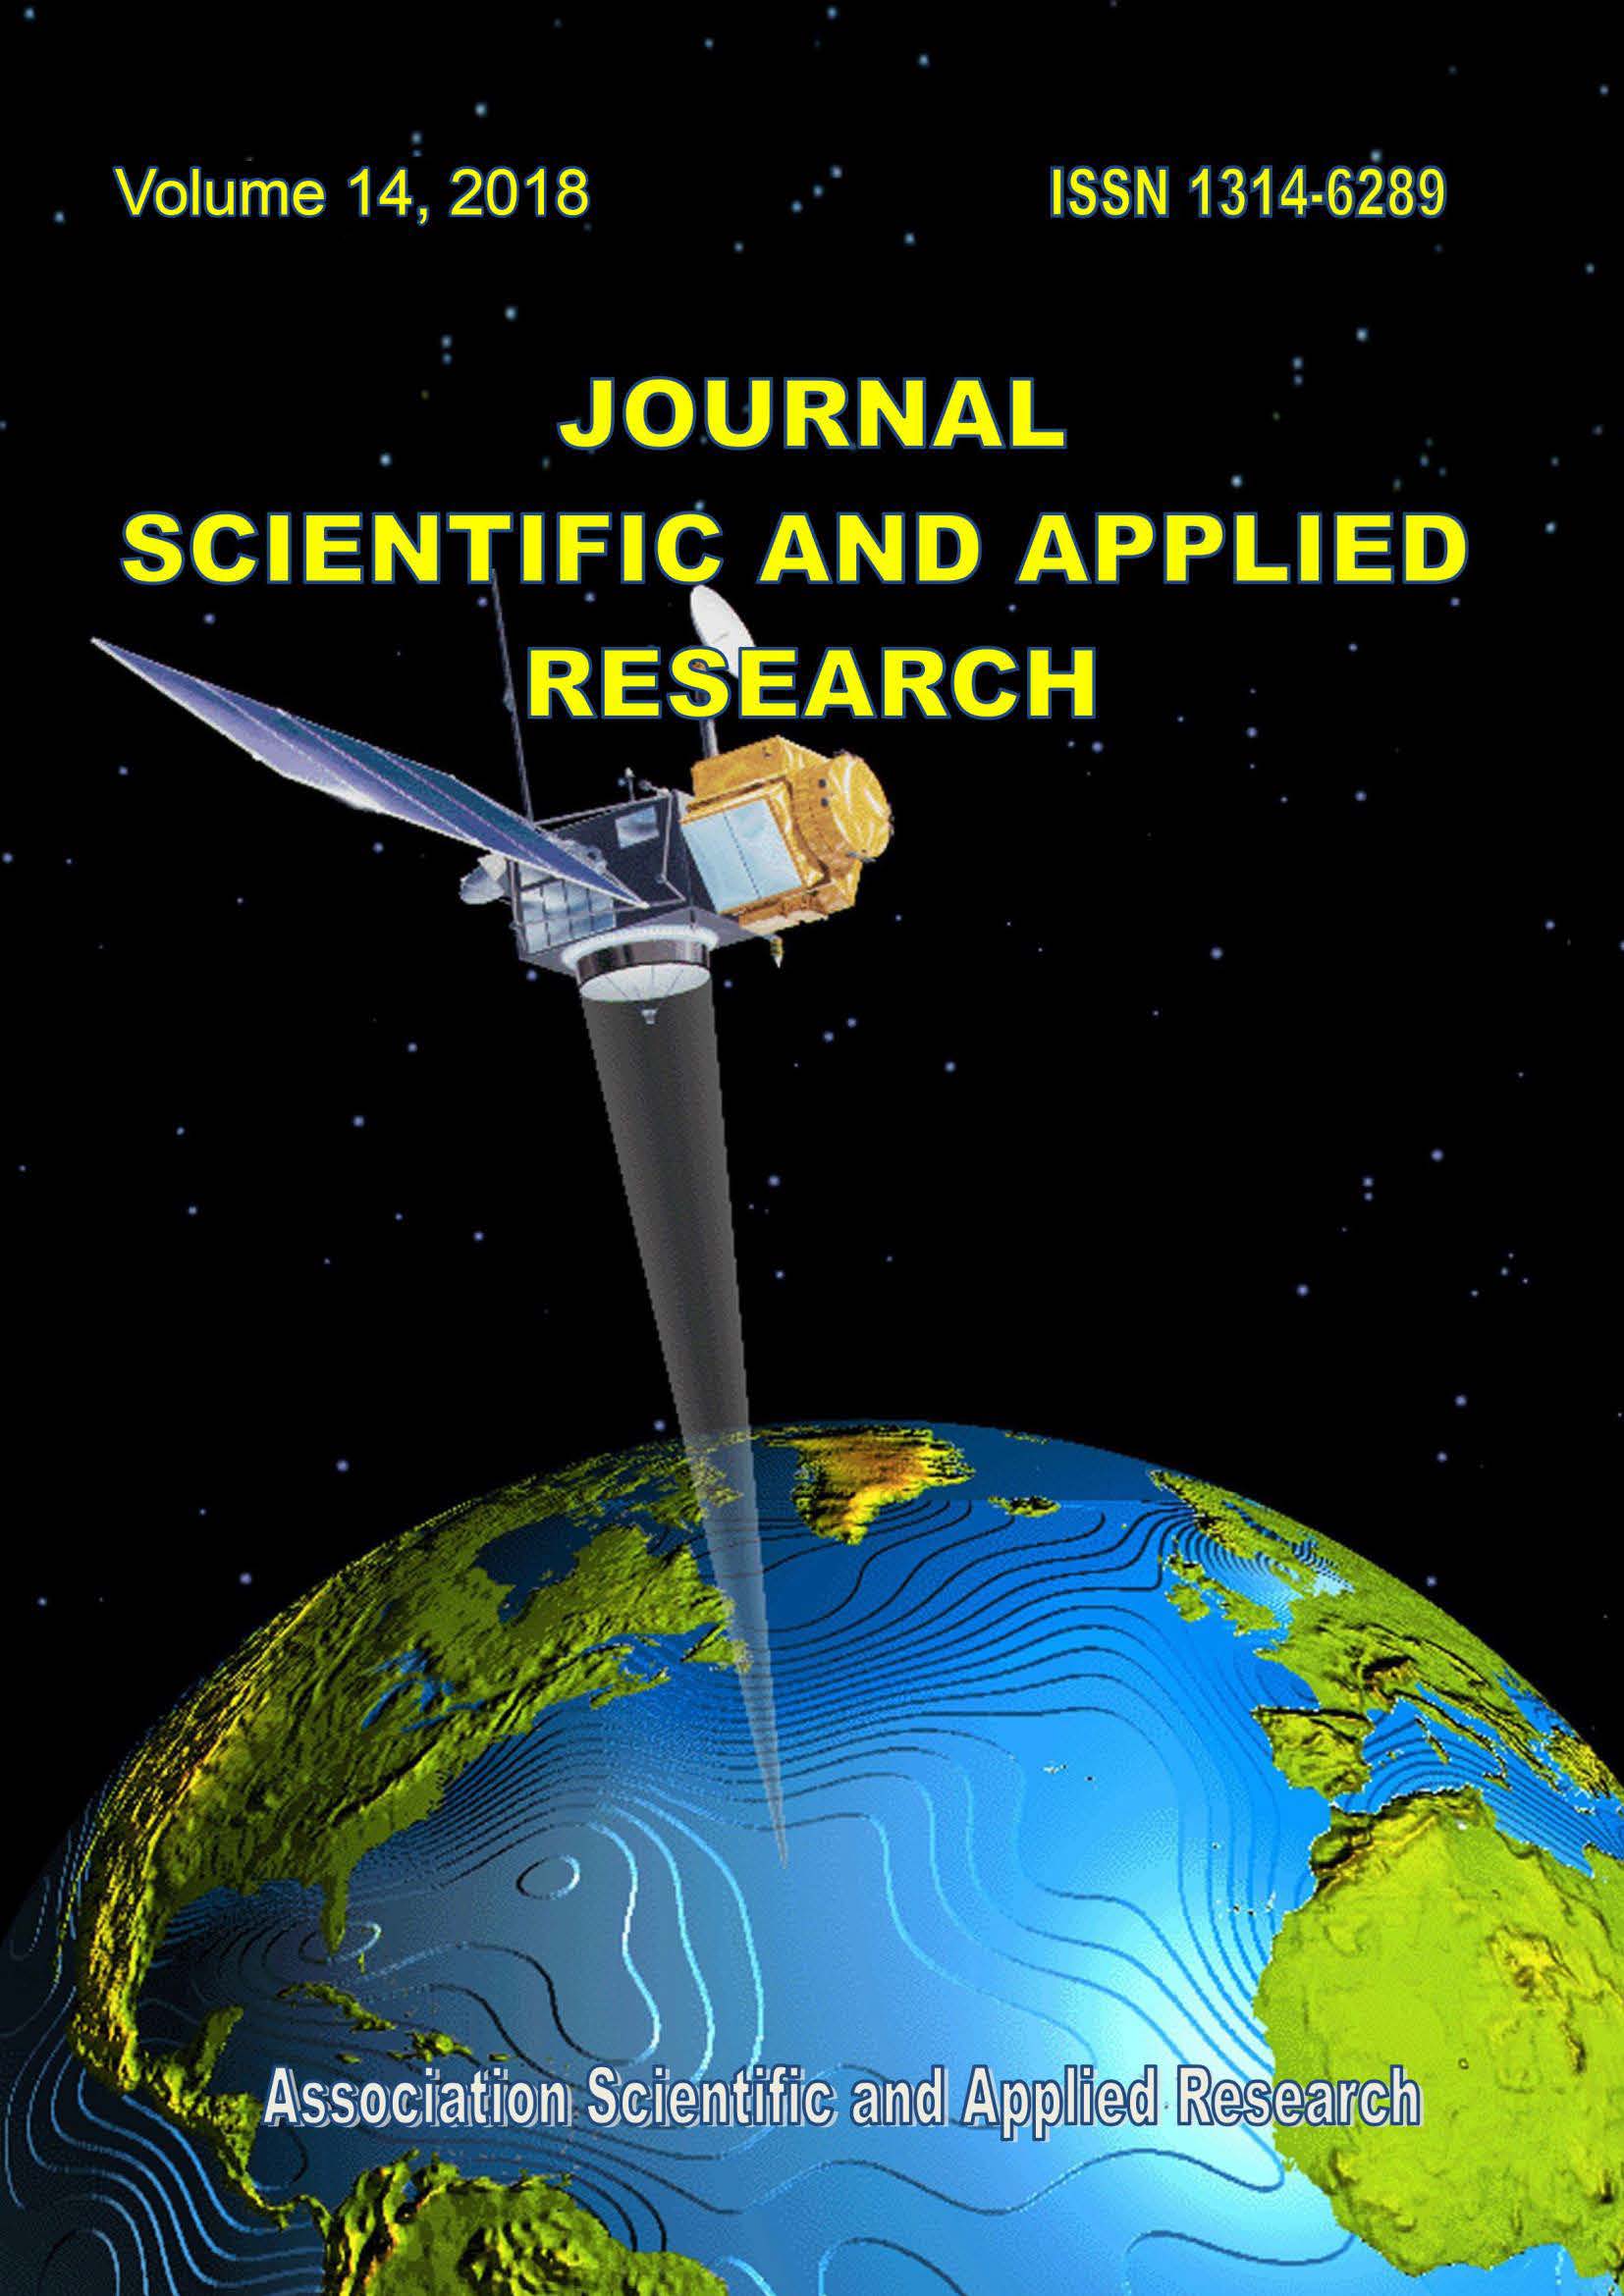 					View Vol. 14 No. 1 (2018): Journal Scientific and Applied Research
				